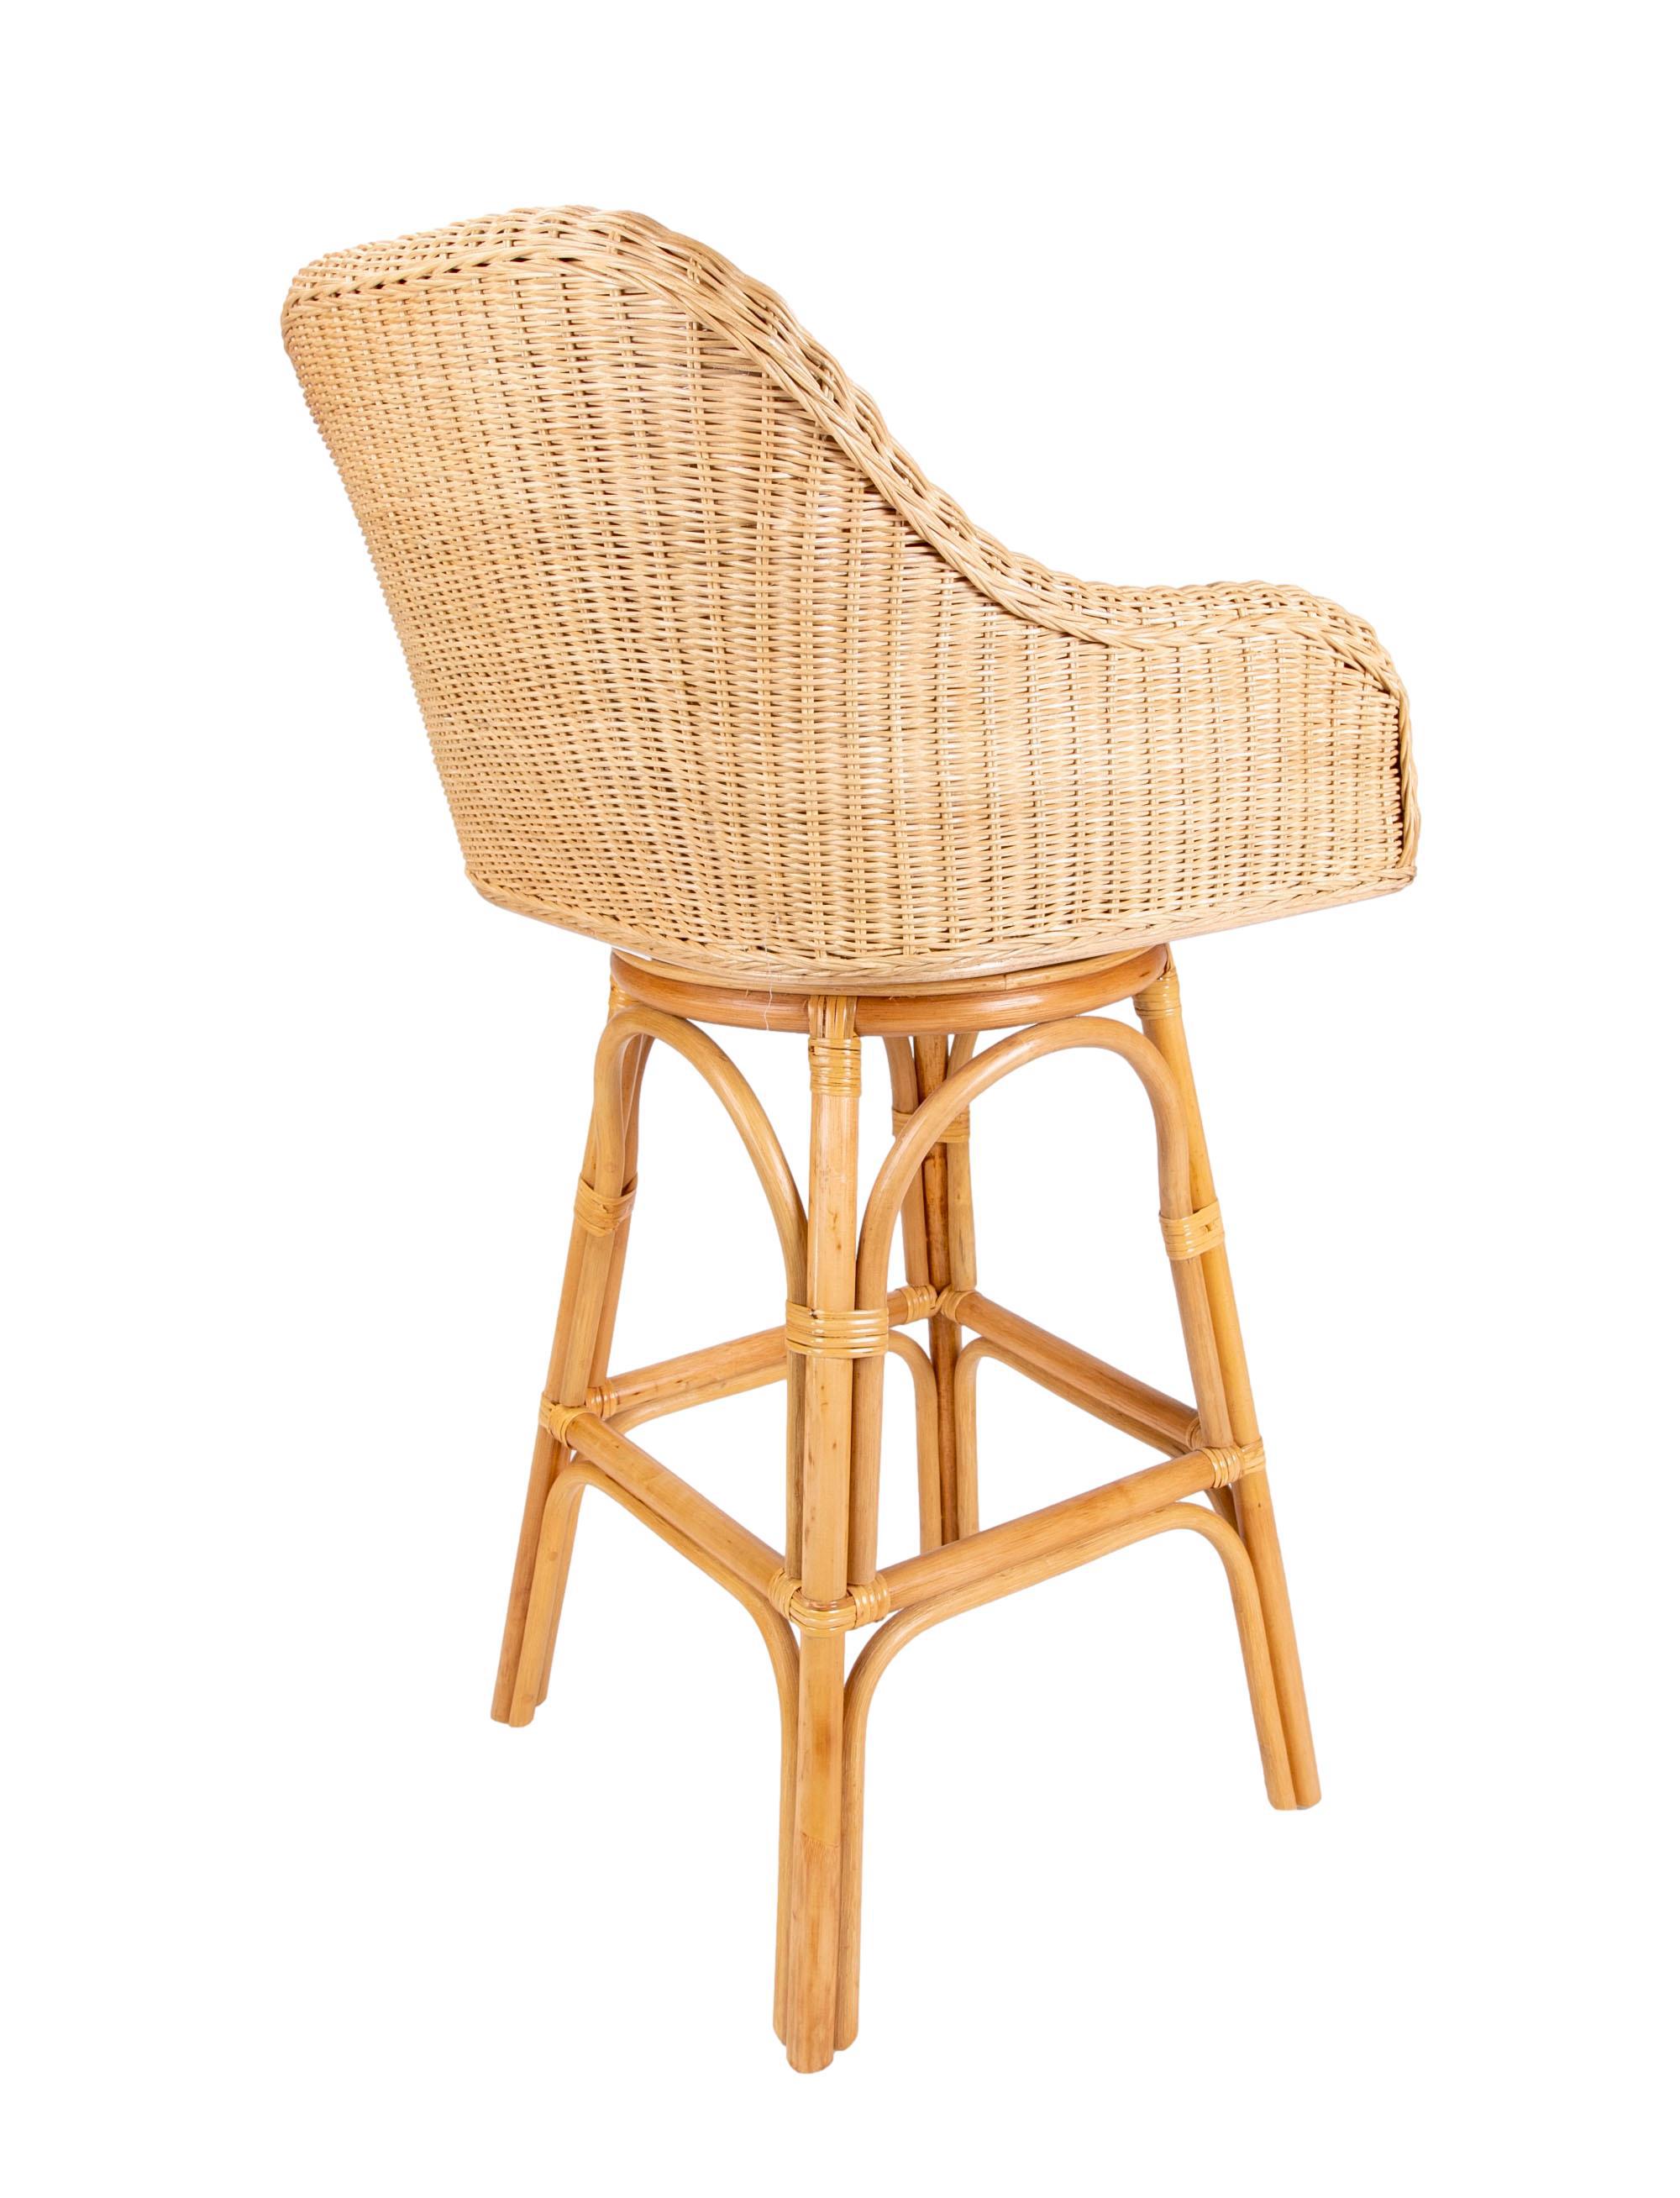 Contemporary Upholstered Rattan and Wicker Bar stool with Sideways Movement